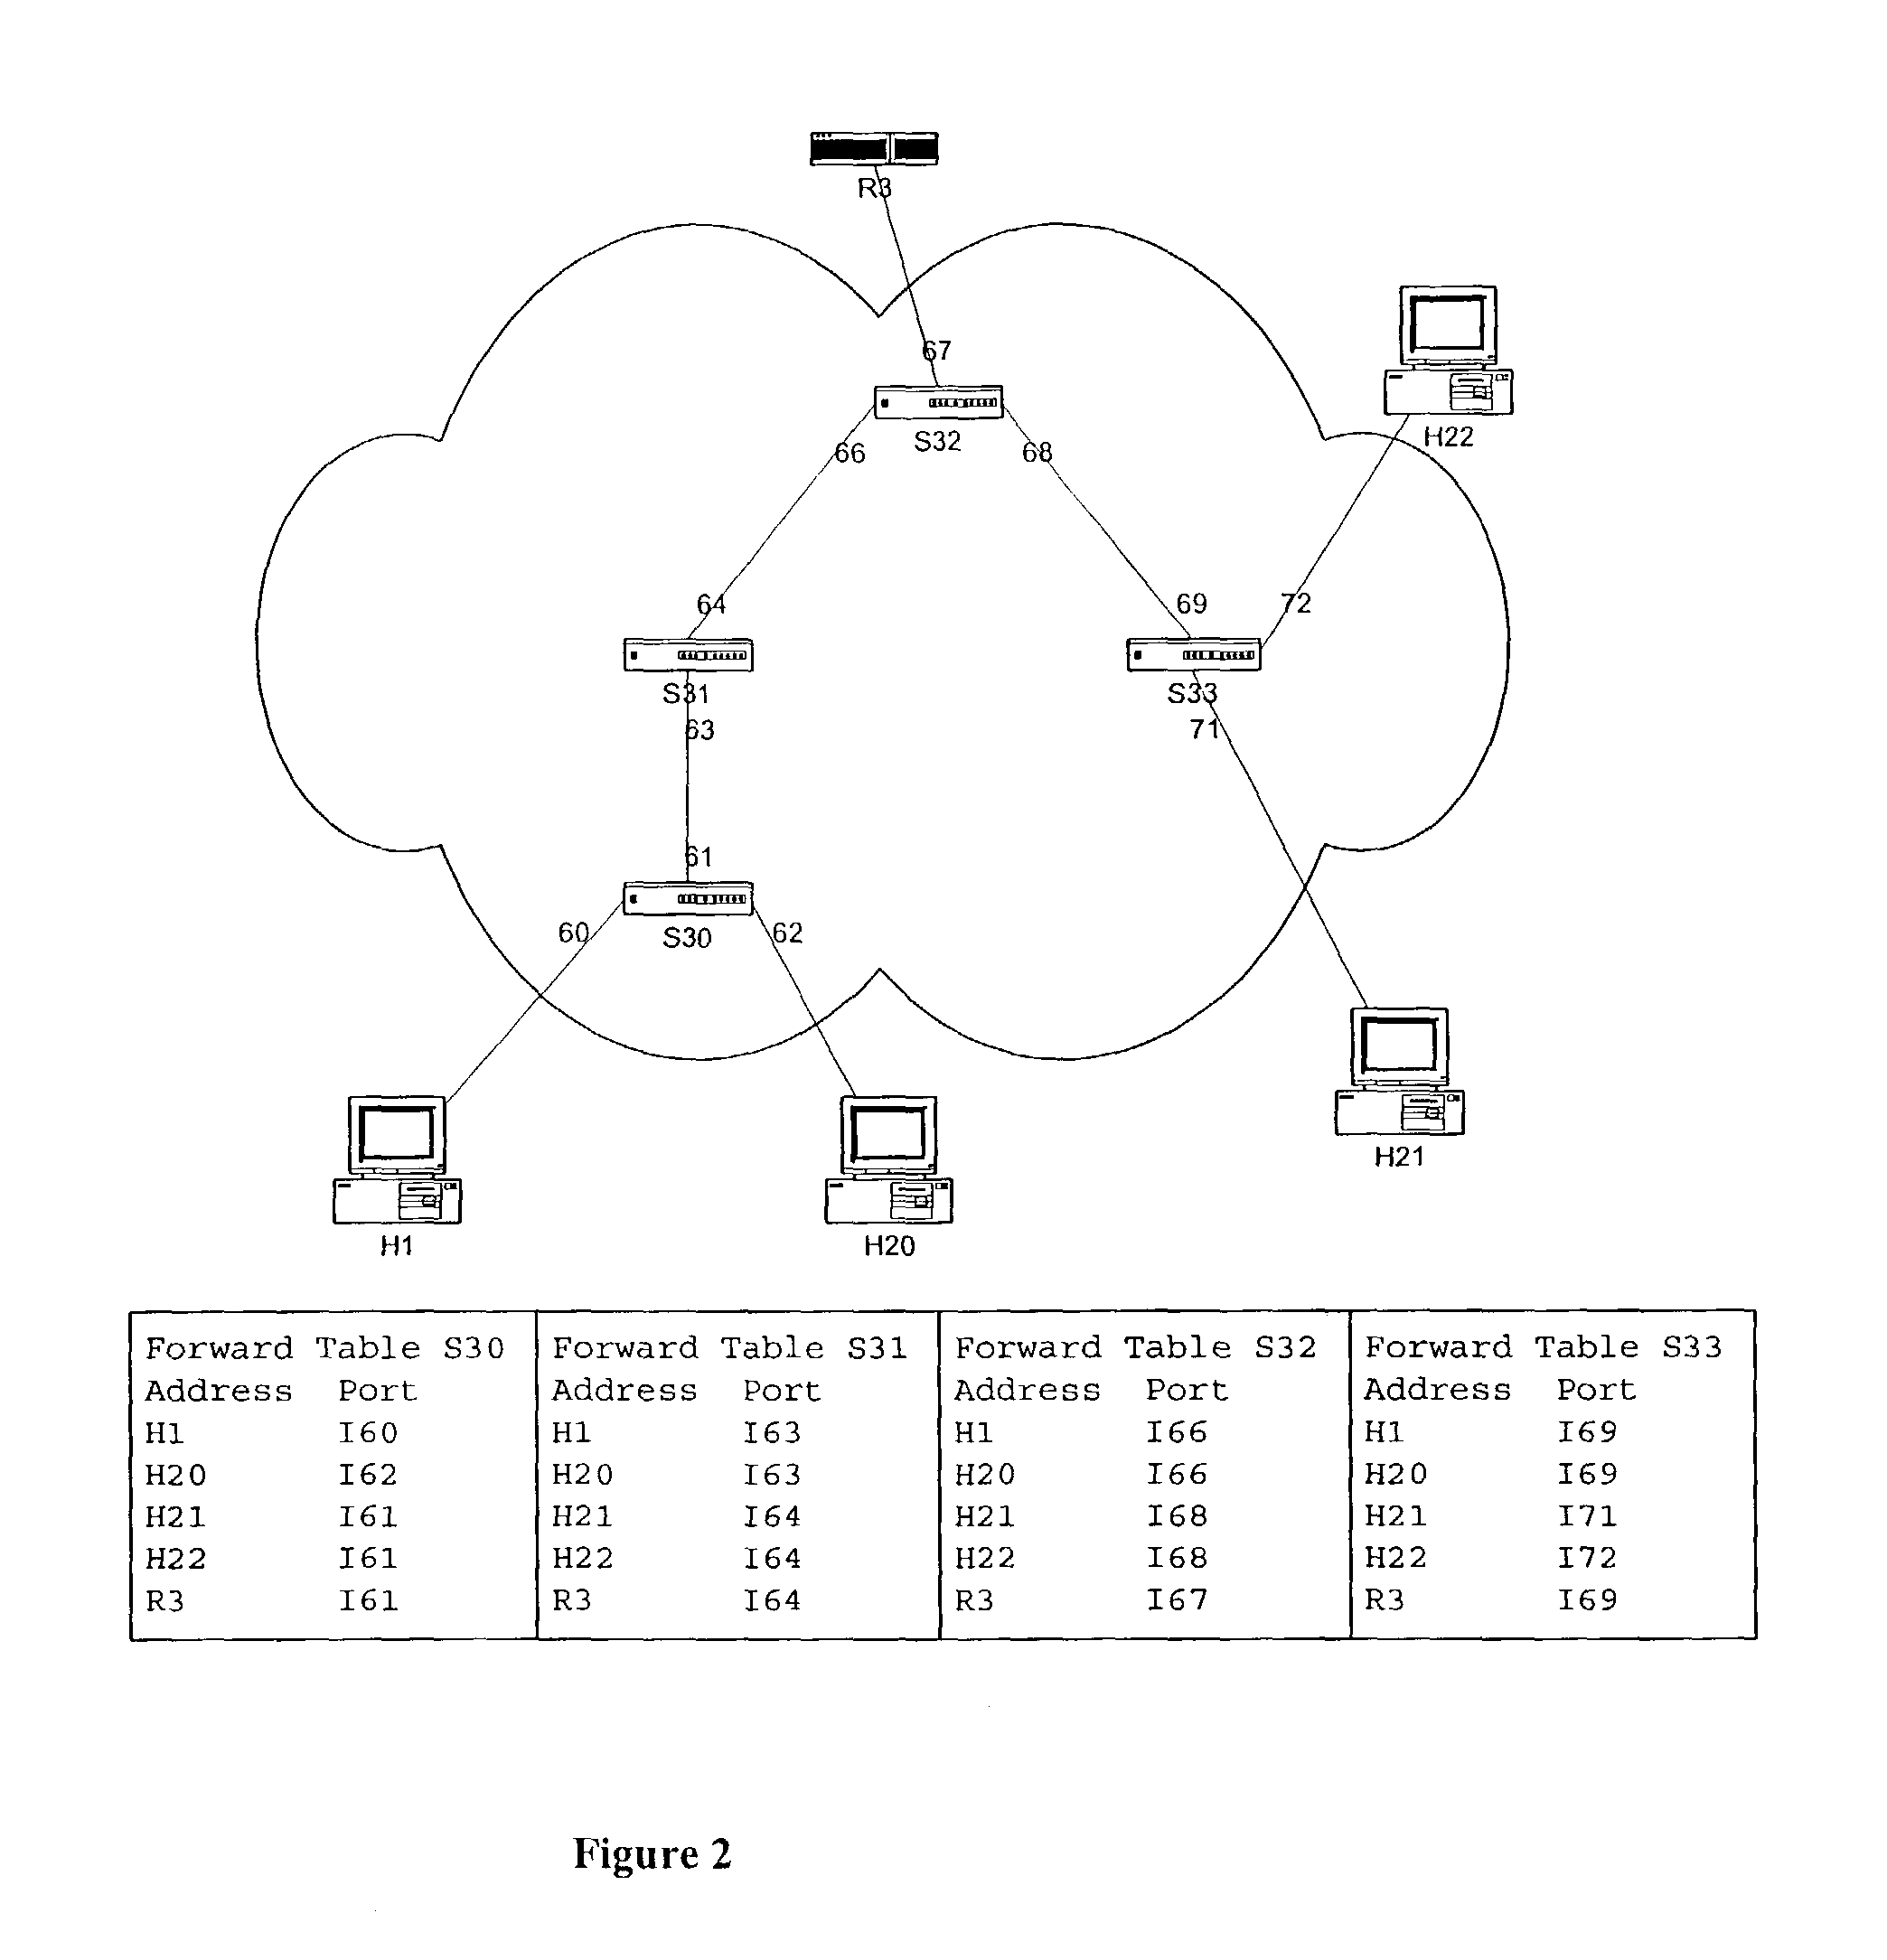 Network traffic generation and monitoring systems and methods for their use in testing frameworks for determining suitability of a network for target applications